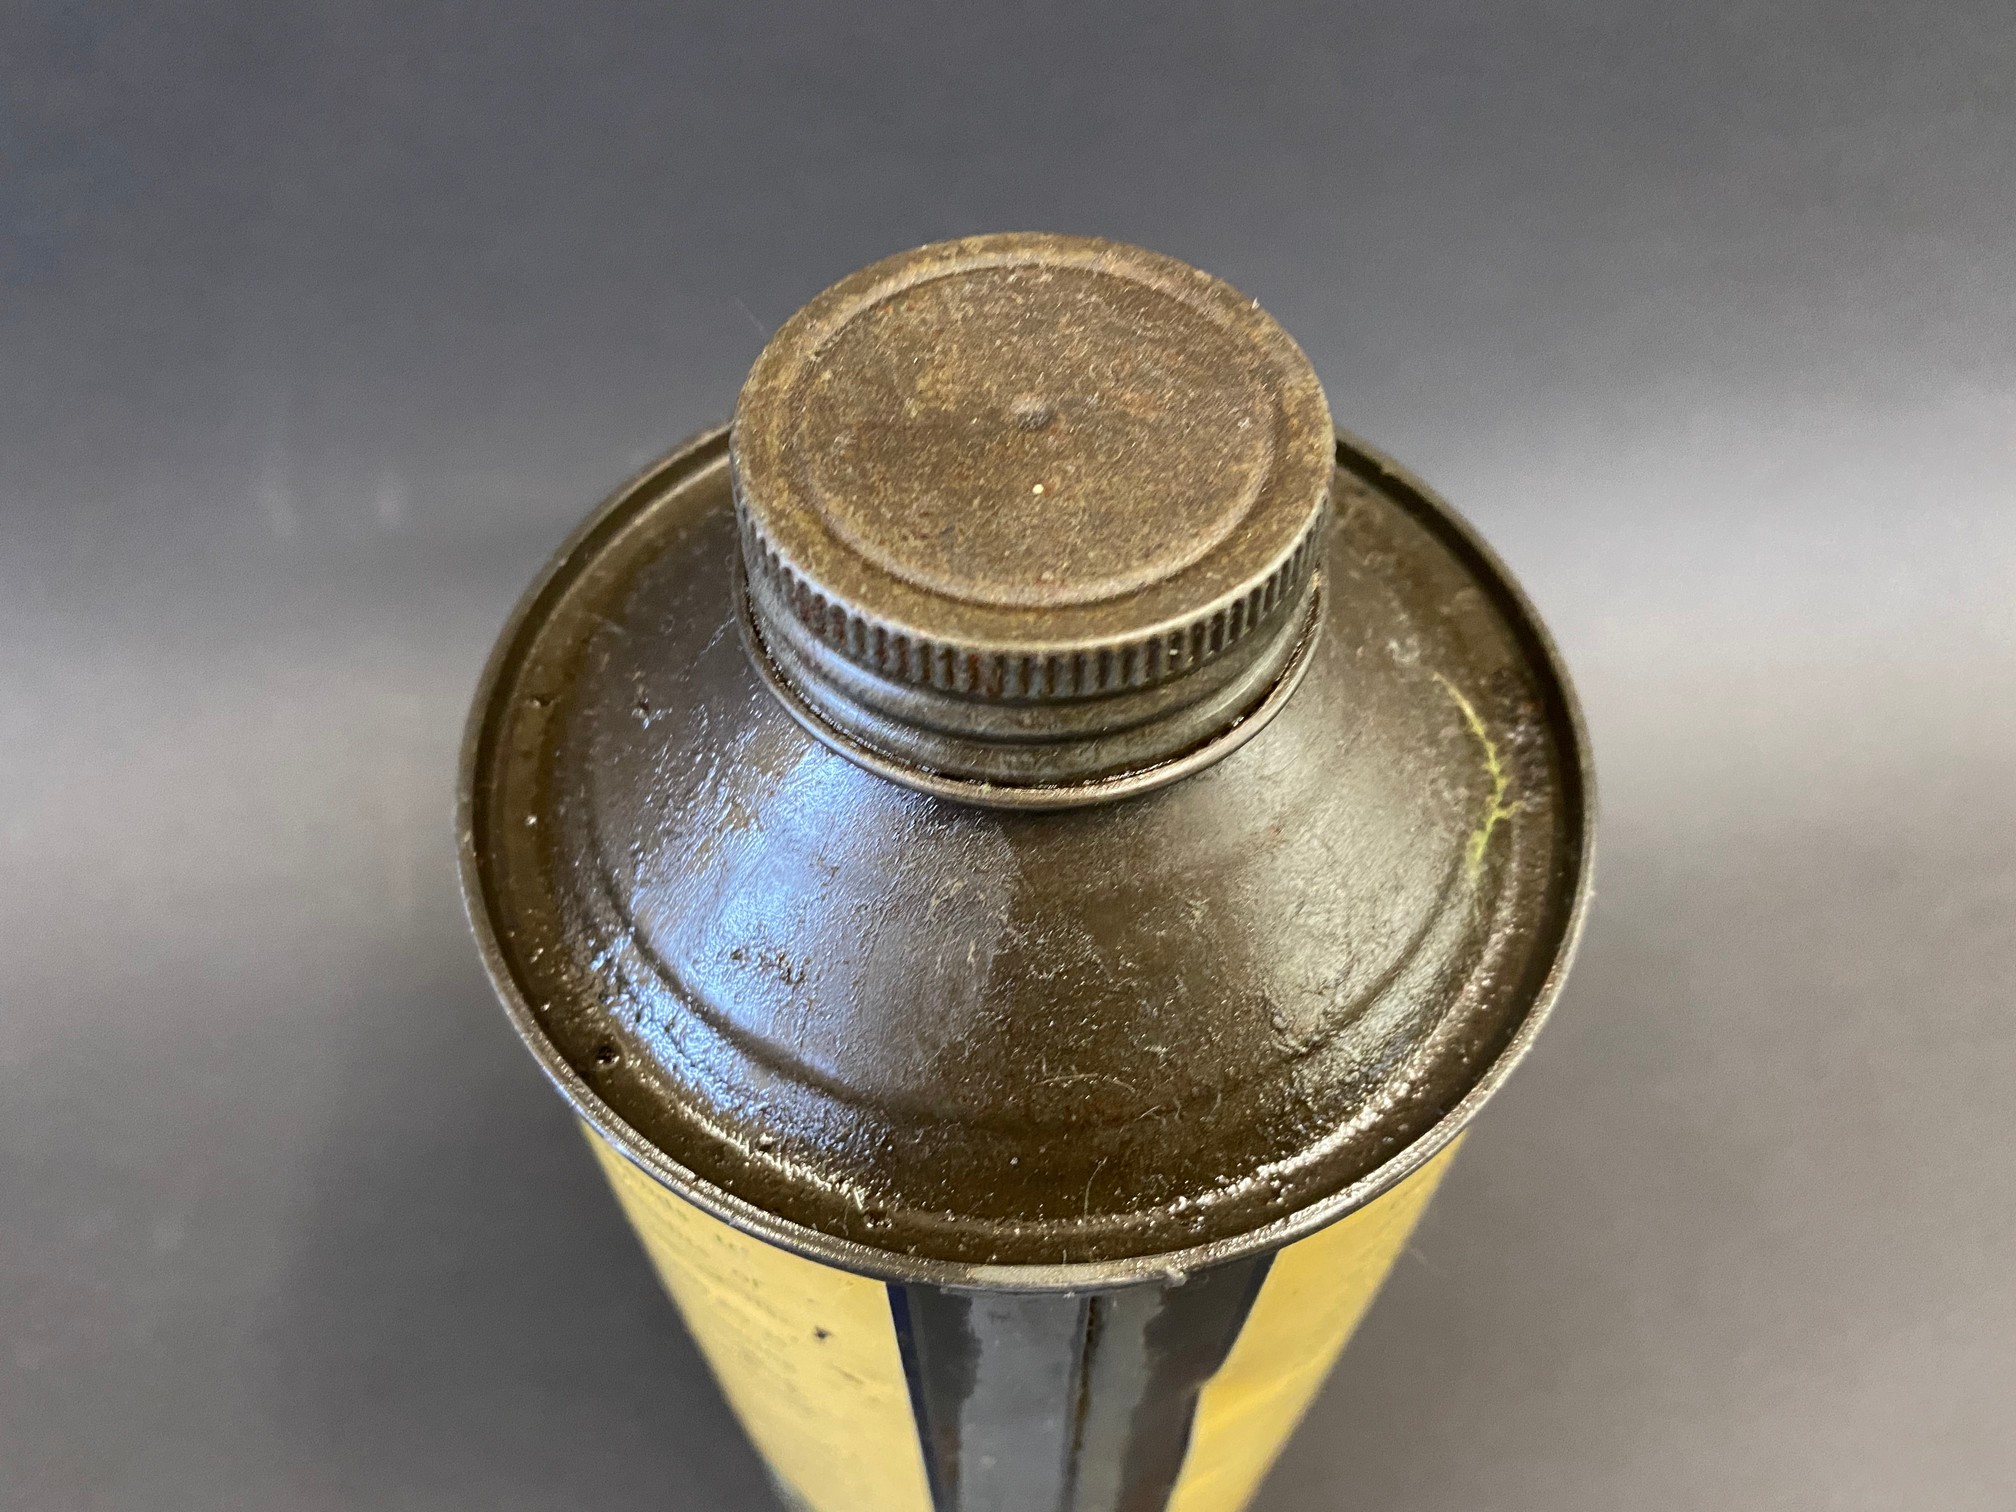 A Duckham's Q20-50 Multigrade Engine Oil cylindrical quart can. - Image 3 of 4